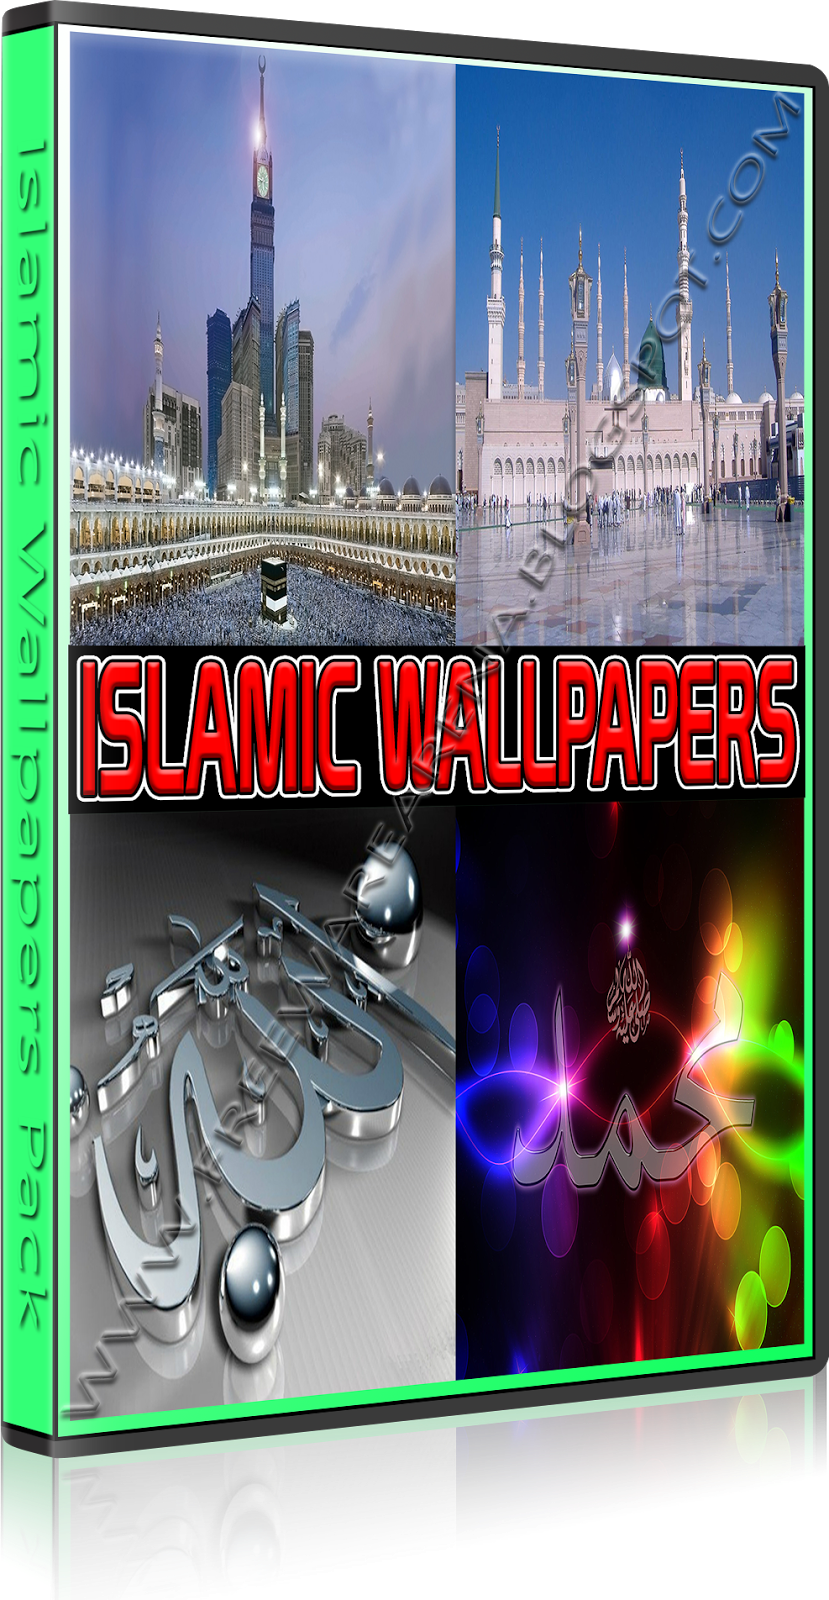 Best 100 Fhd Islamic Wallpapers Pack Dvd Cover - Online Advertising - HD Wallpaper 